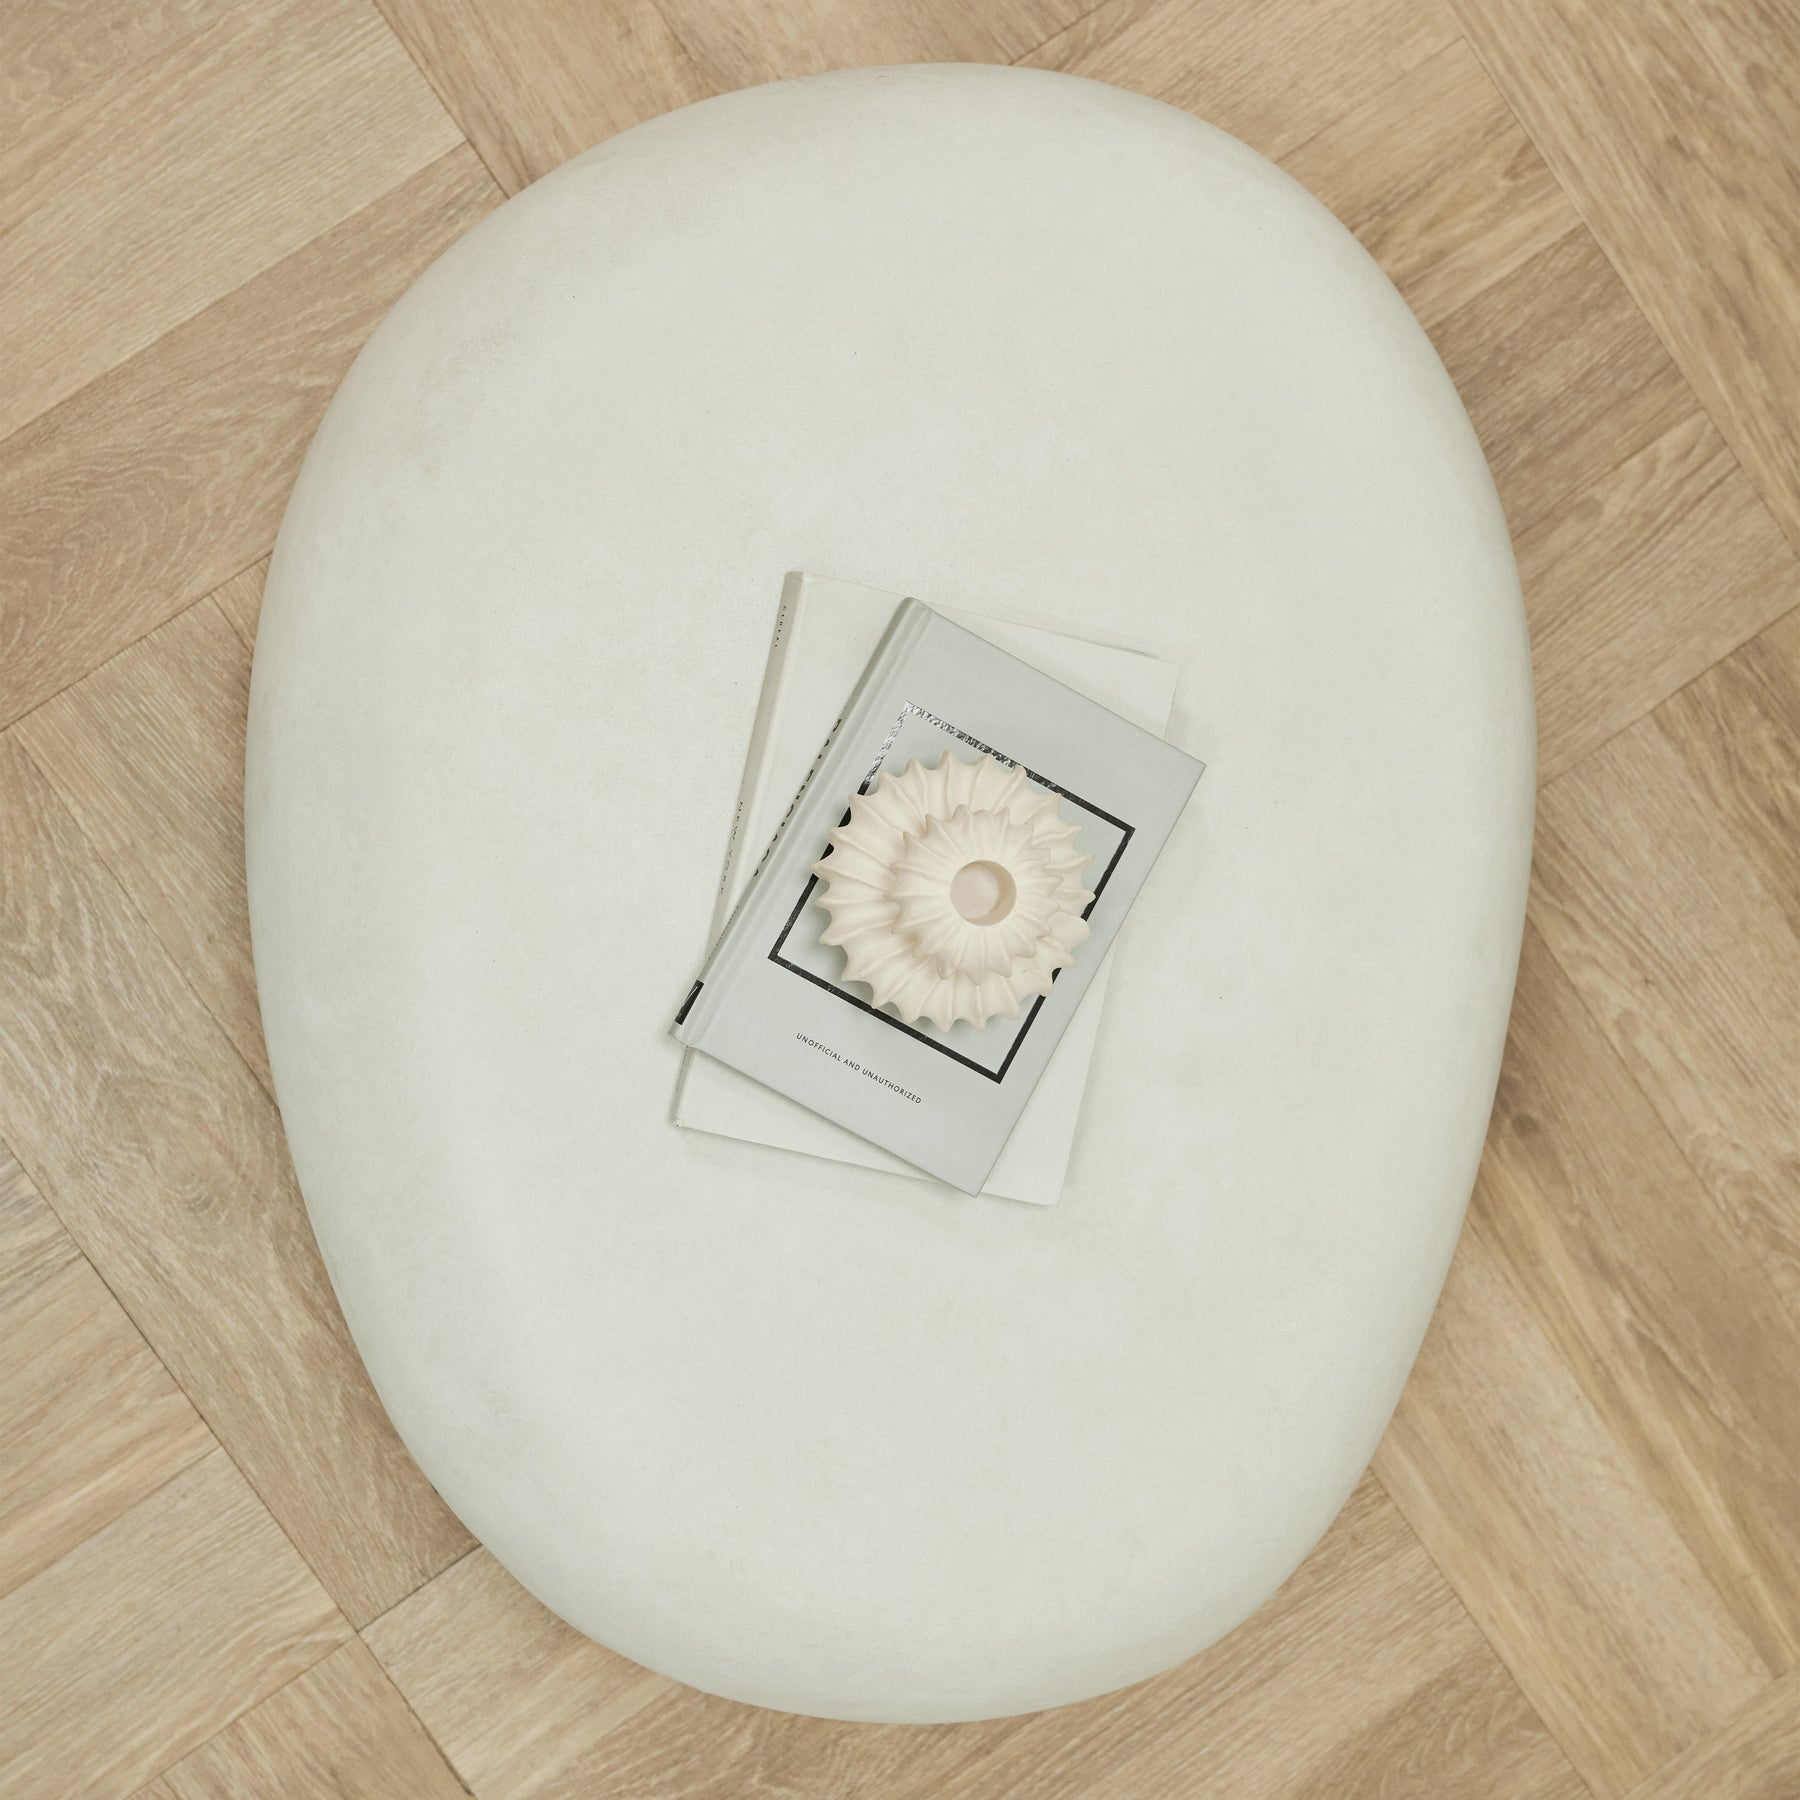 Top-down view of Minimal Concrete Pebble Coffee Table Large